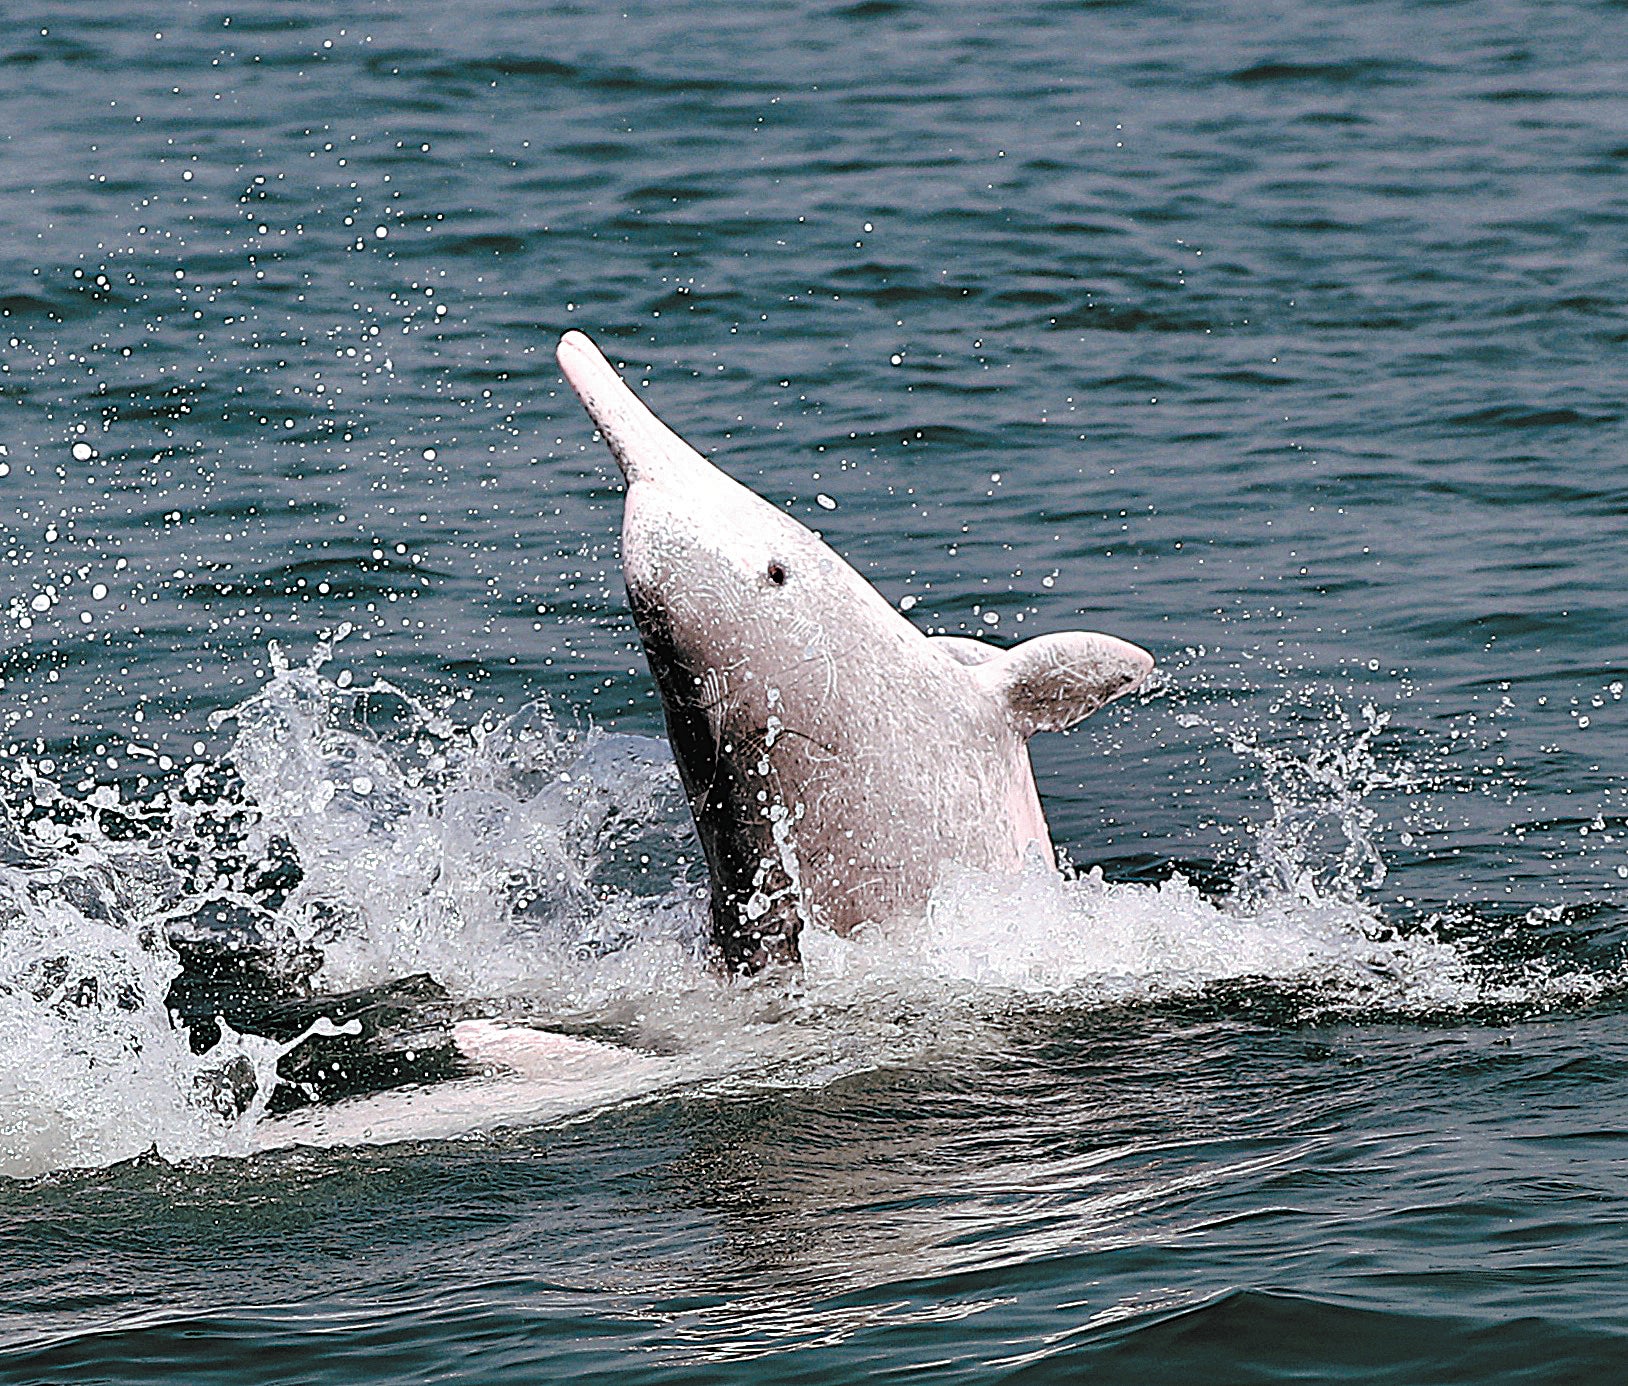 Chinese white dolphins have existed for about 10 million years